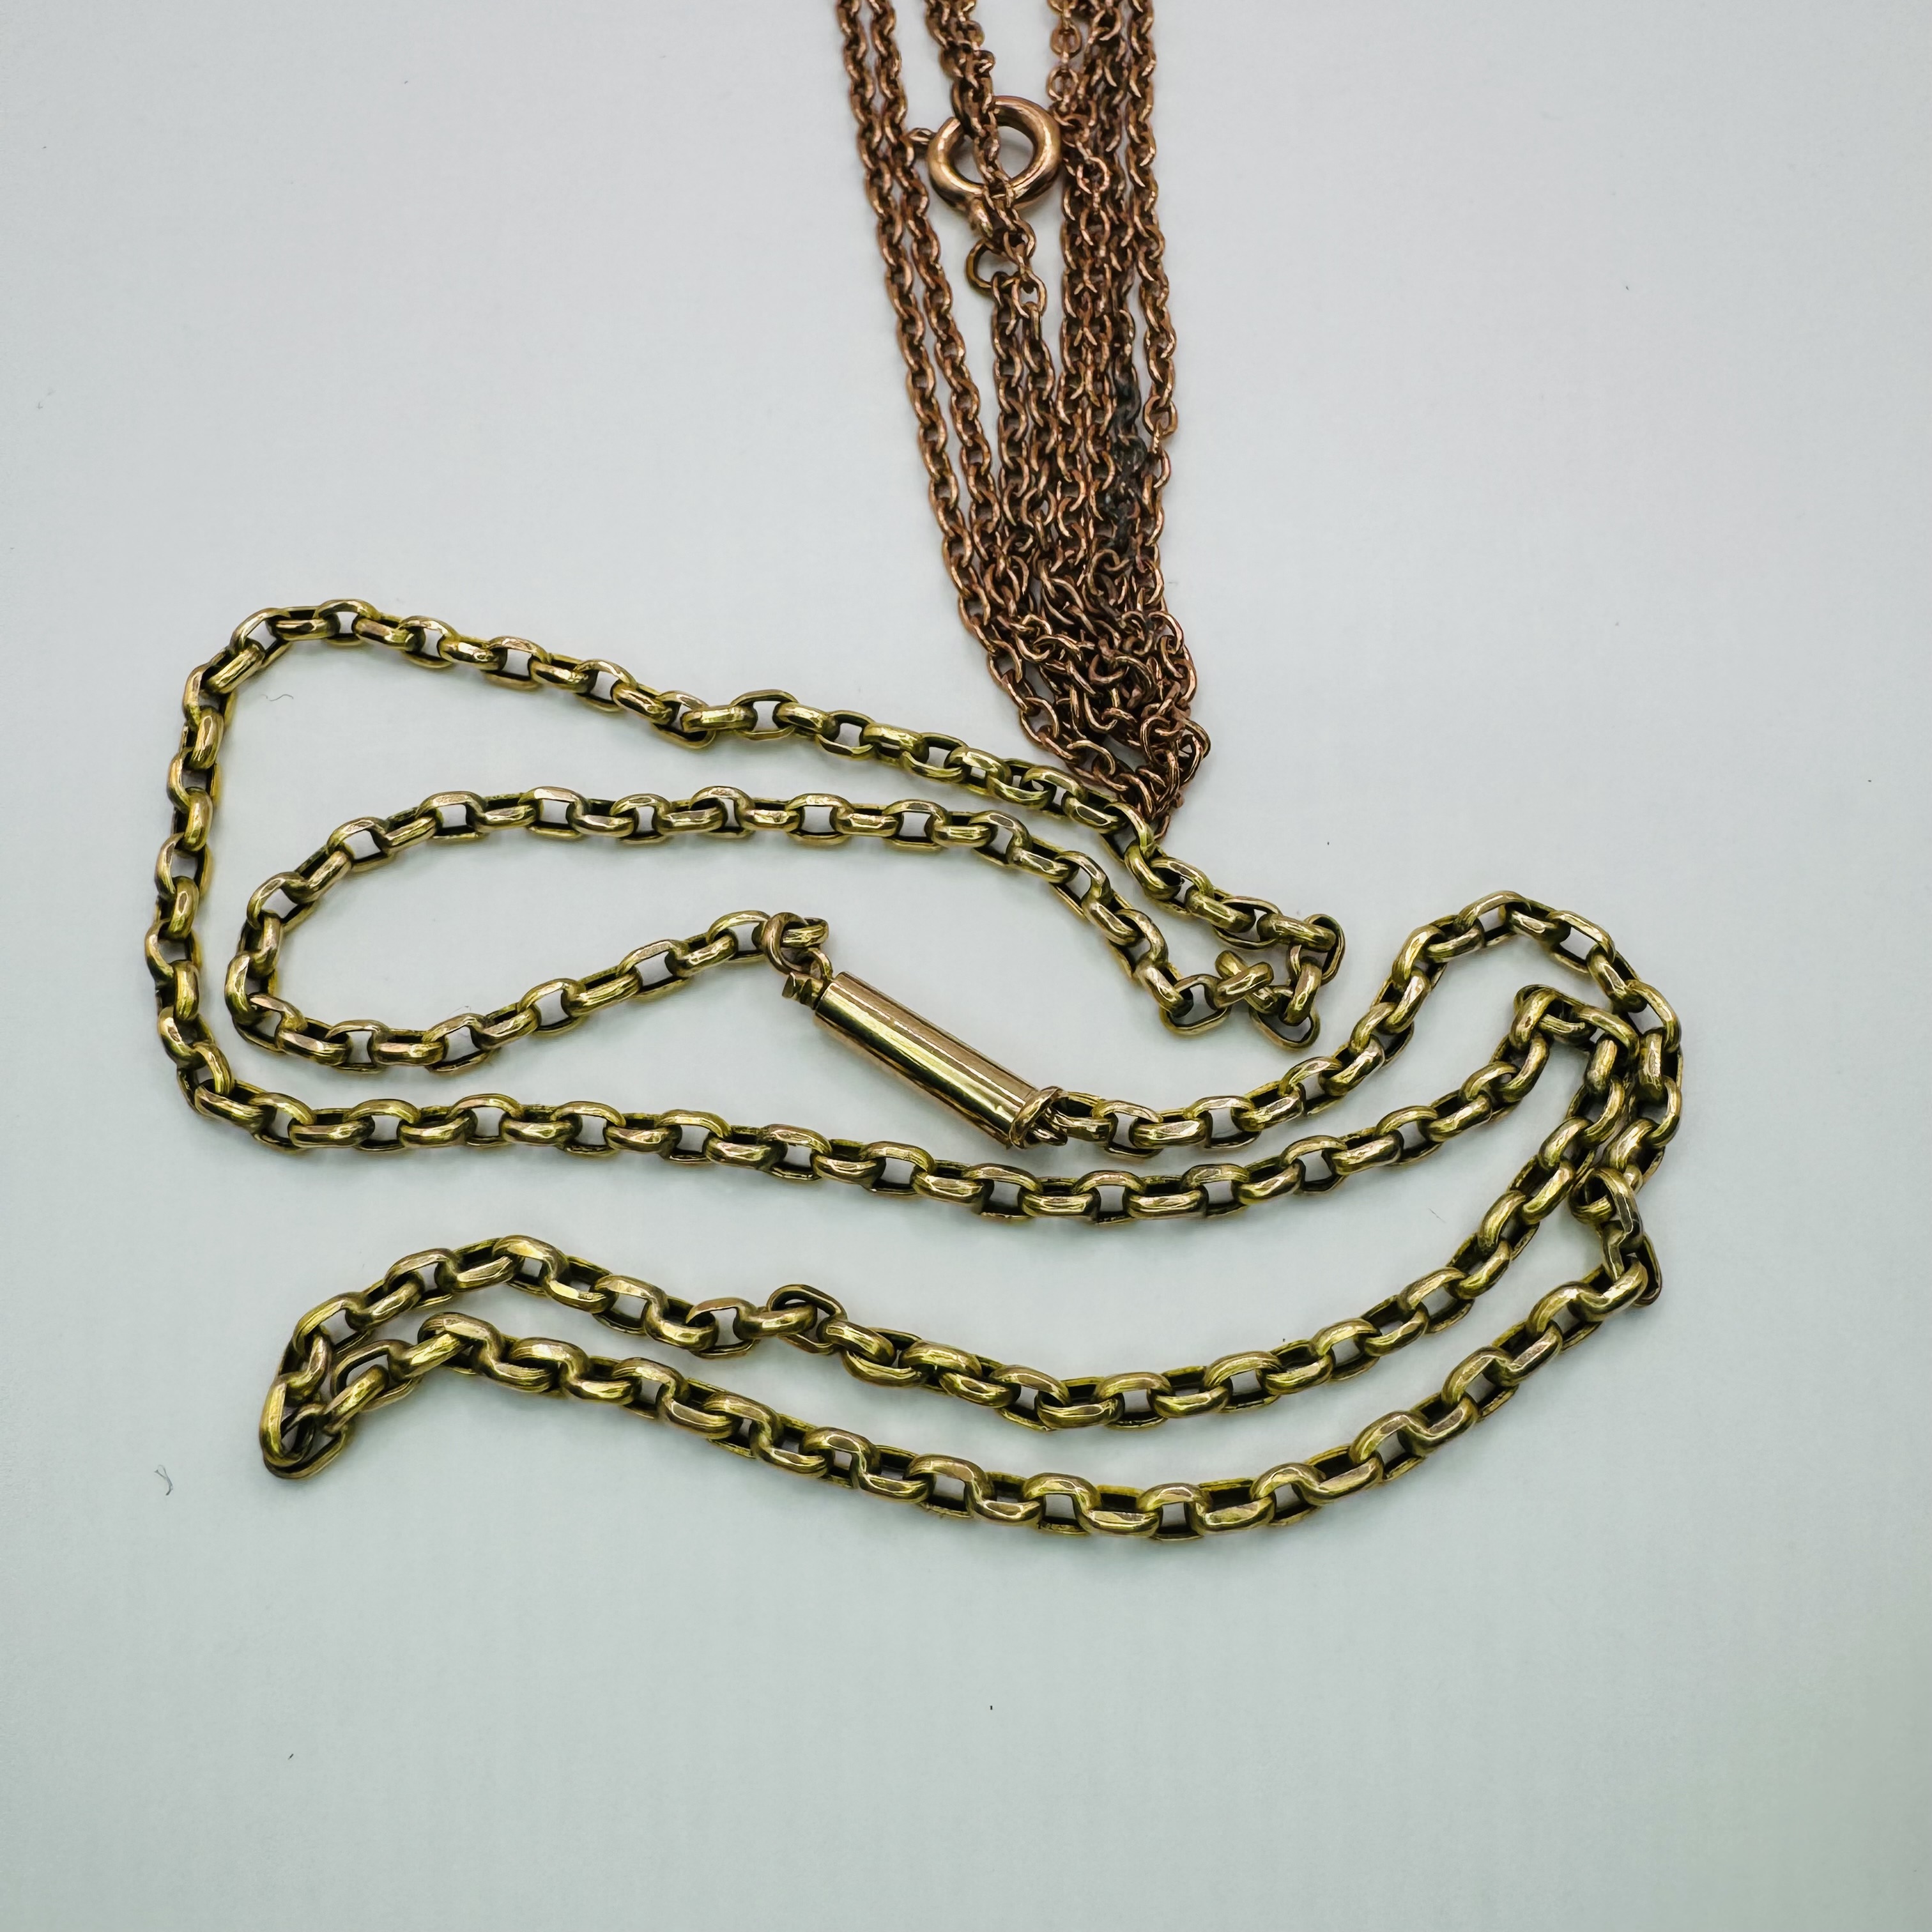 A yellow precious metal belcher chain, with a barrel clasp, approximate length 41.5cm and - Image 2 of 2